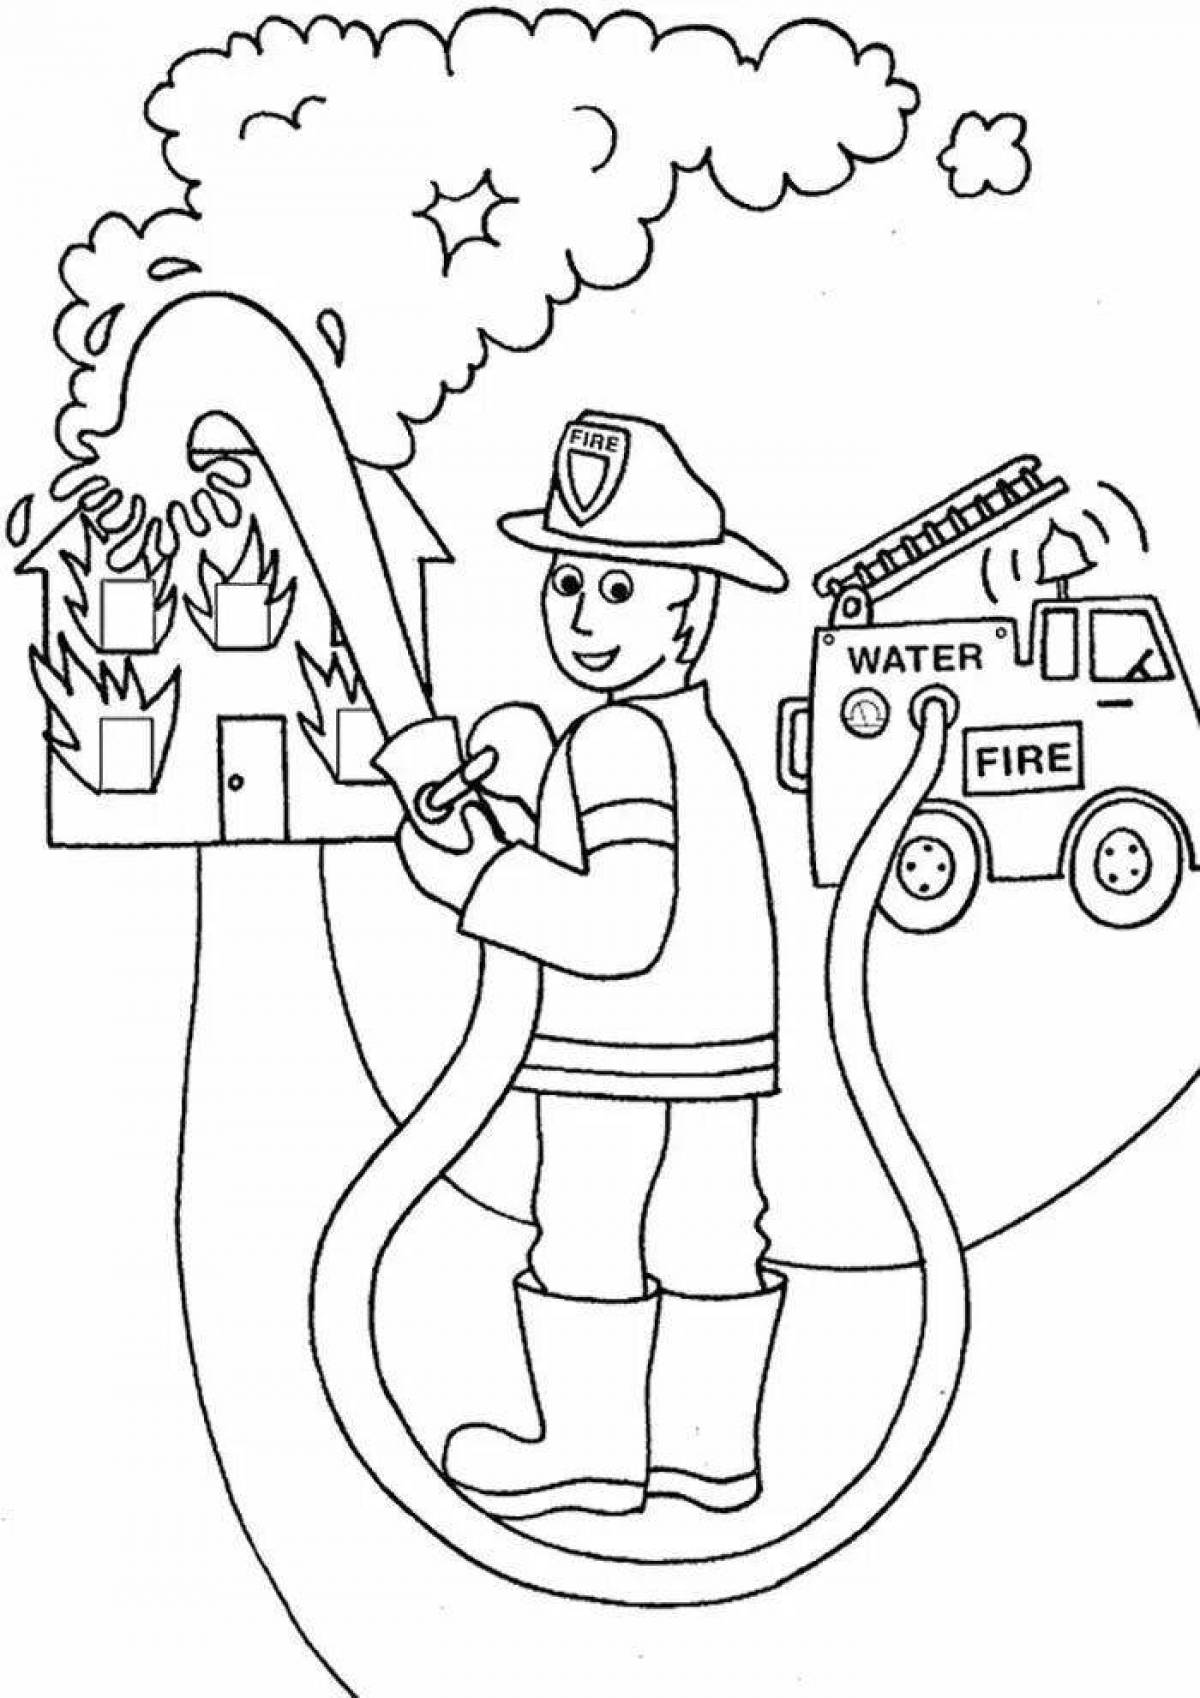 Fire safety in kindergarten makes you think